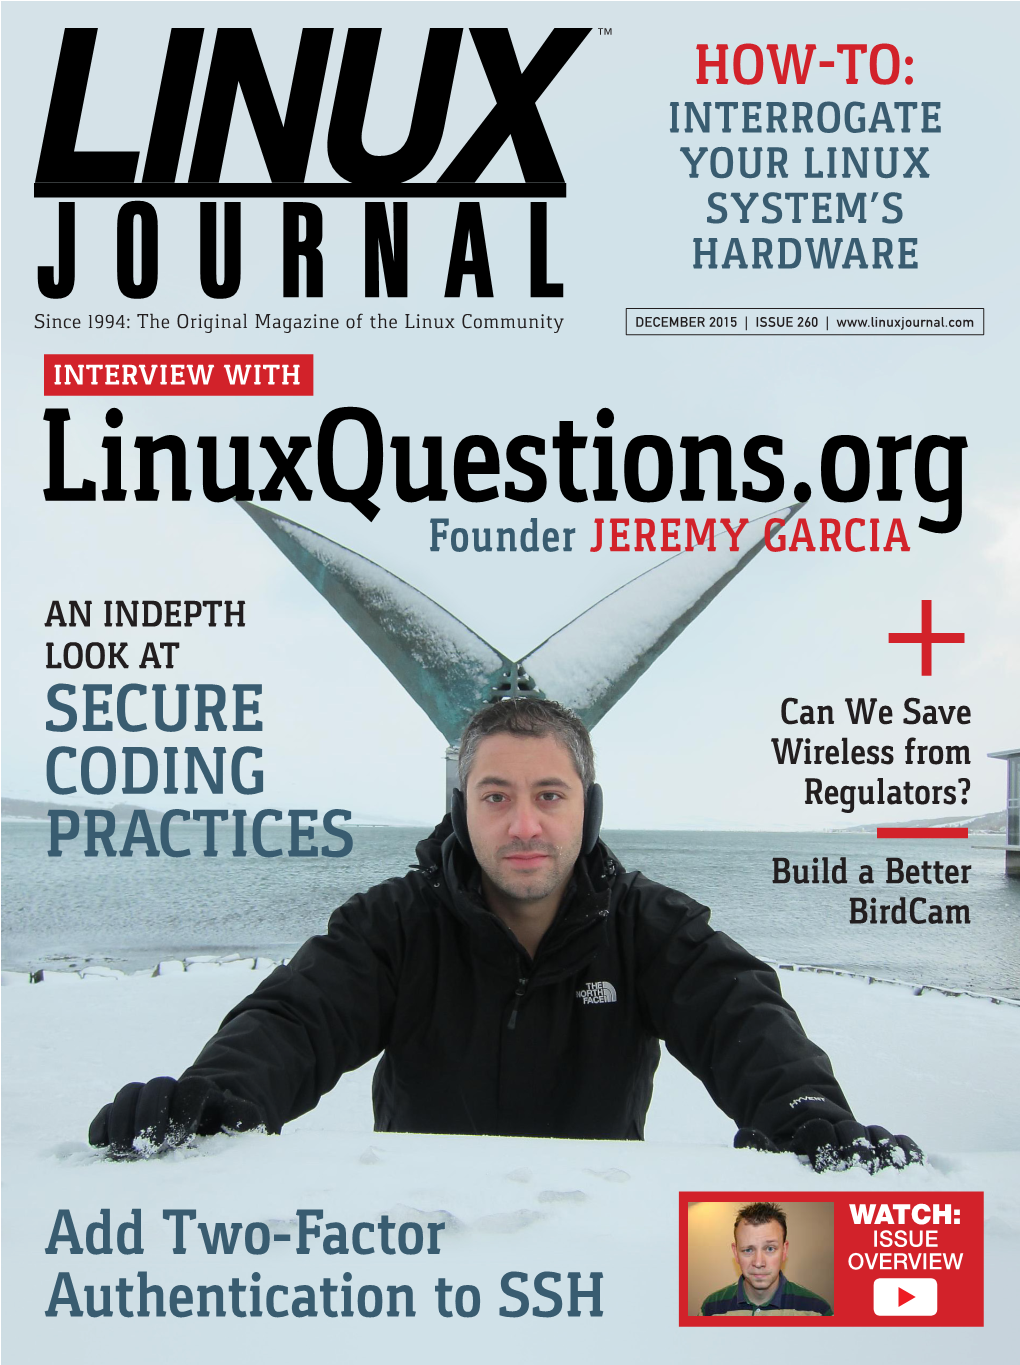 LINUX JOURNAL (ISSN 1075-3583) Is Published Monthly by Belltown Media, Inc., PO Box 980985, Houston, TX 77098 USA